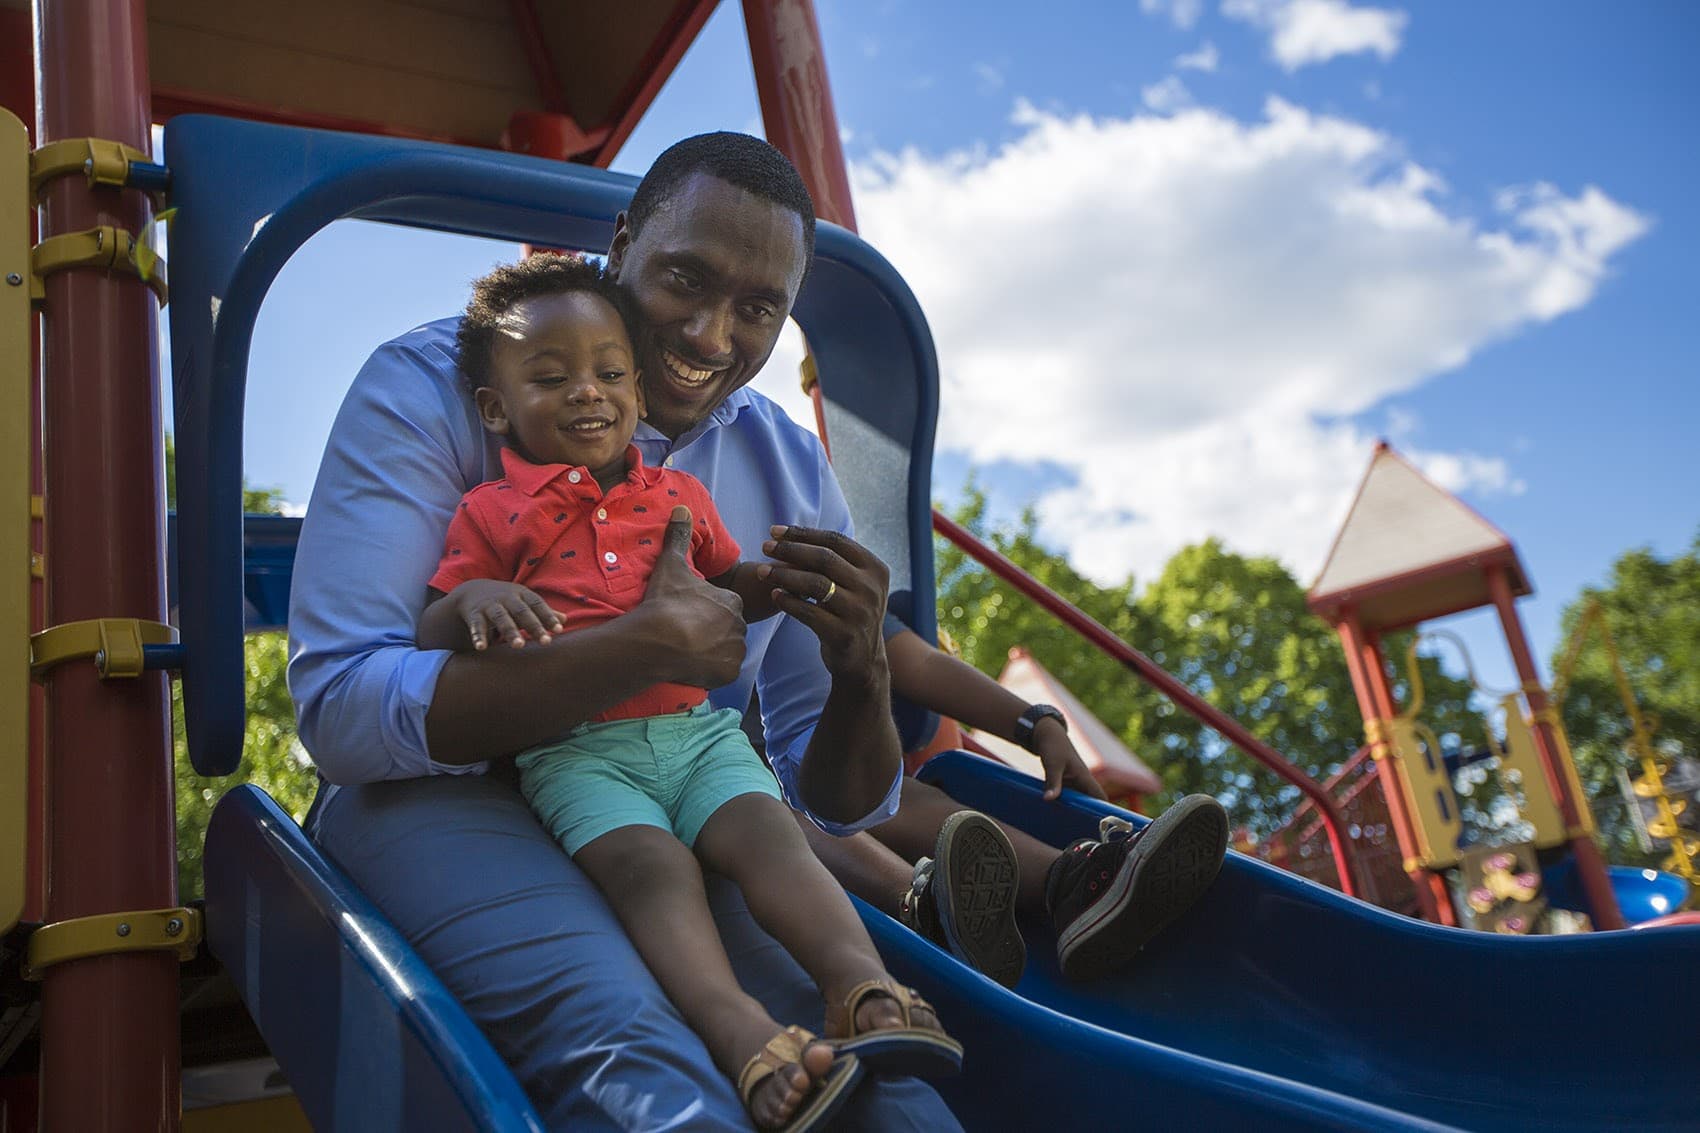 Charles Daniels, founder and CEO of the Boston-based nonprofit Fathers' Uplift, rides down a slide with his 1-year-old son Clayton in the Thetford Evans Playground in Dorchester. (Jesse Costa/WBUR)